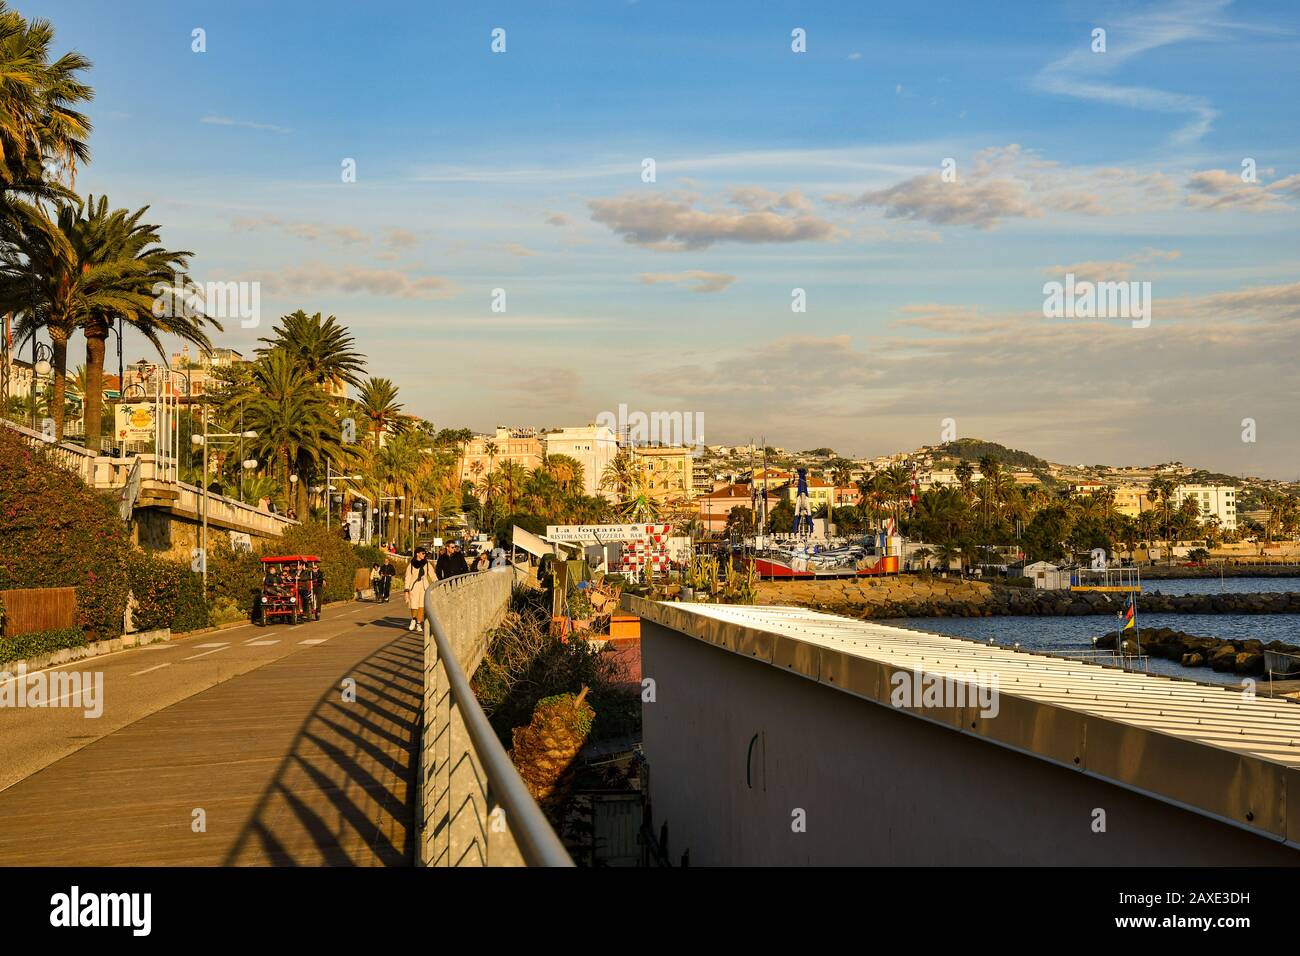 Scenic view of the coastal city with the cycle path and the amusement park on the waterfront in a sunny day, Sanremo, Liguria, Italy Stock Photo